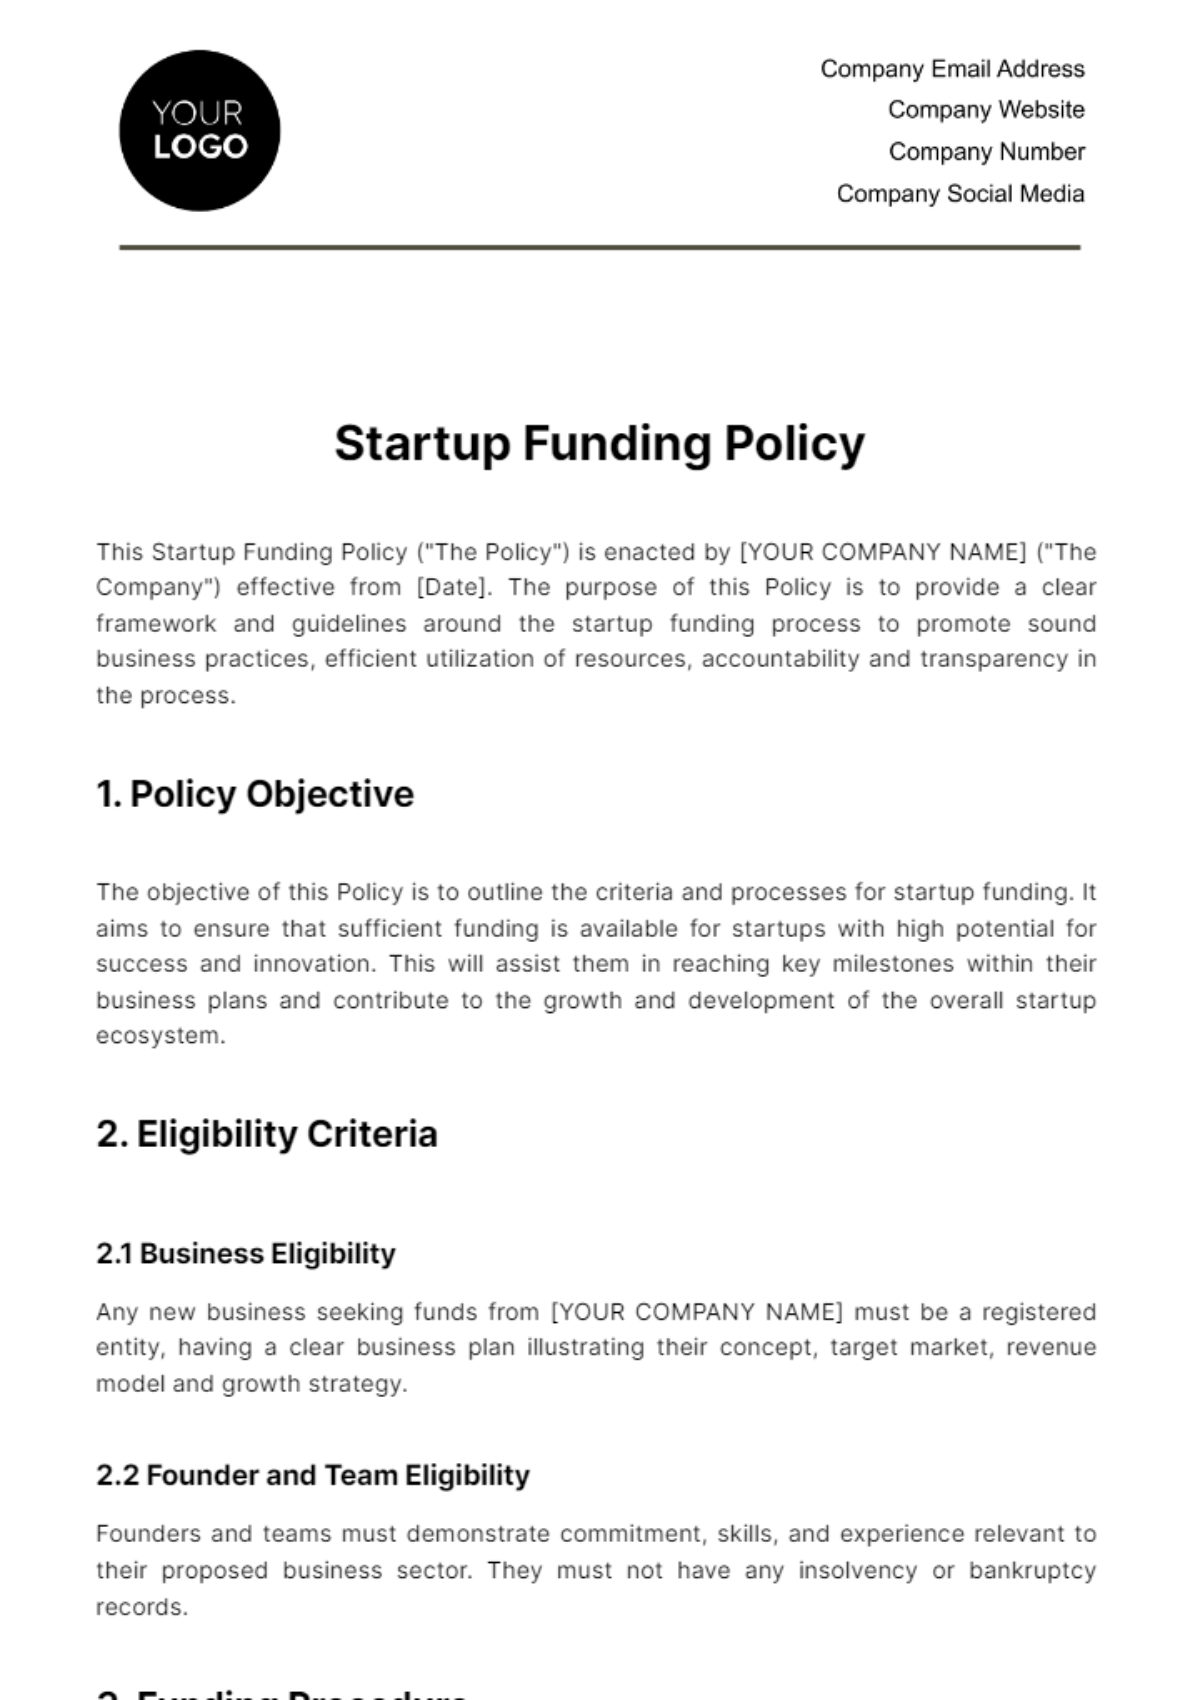 Startup Funding Policy Template